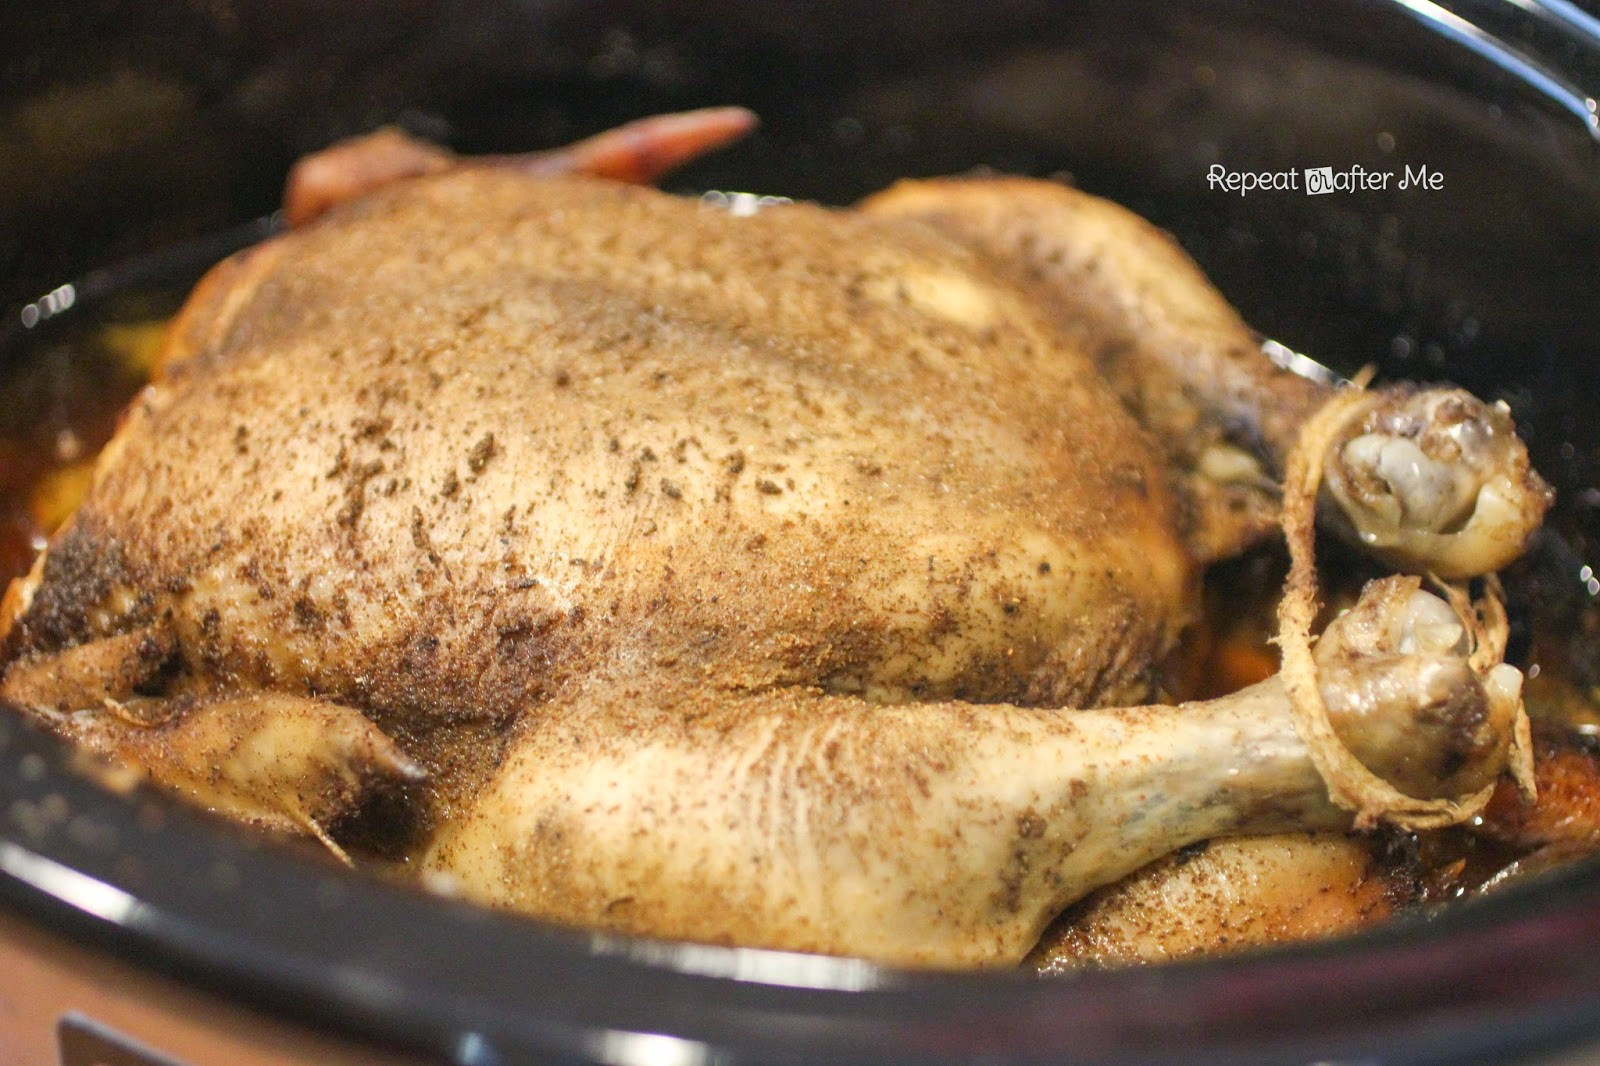 How To Cook Whole Chicken In Crock Pot
 Repeat Crafter Me How to Cook a Whole Chicken in the